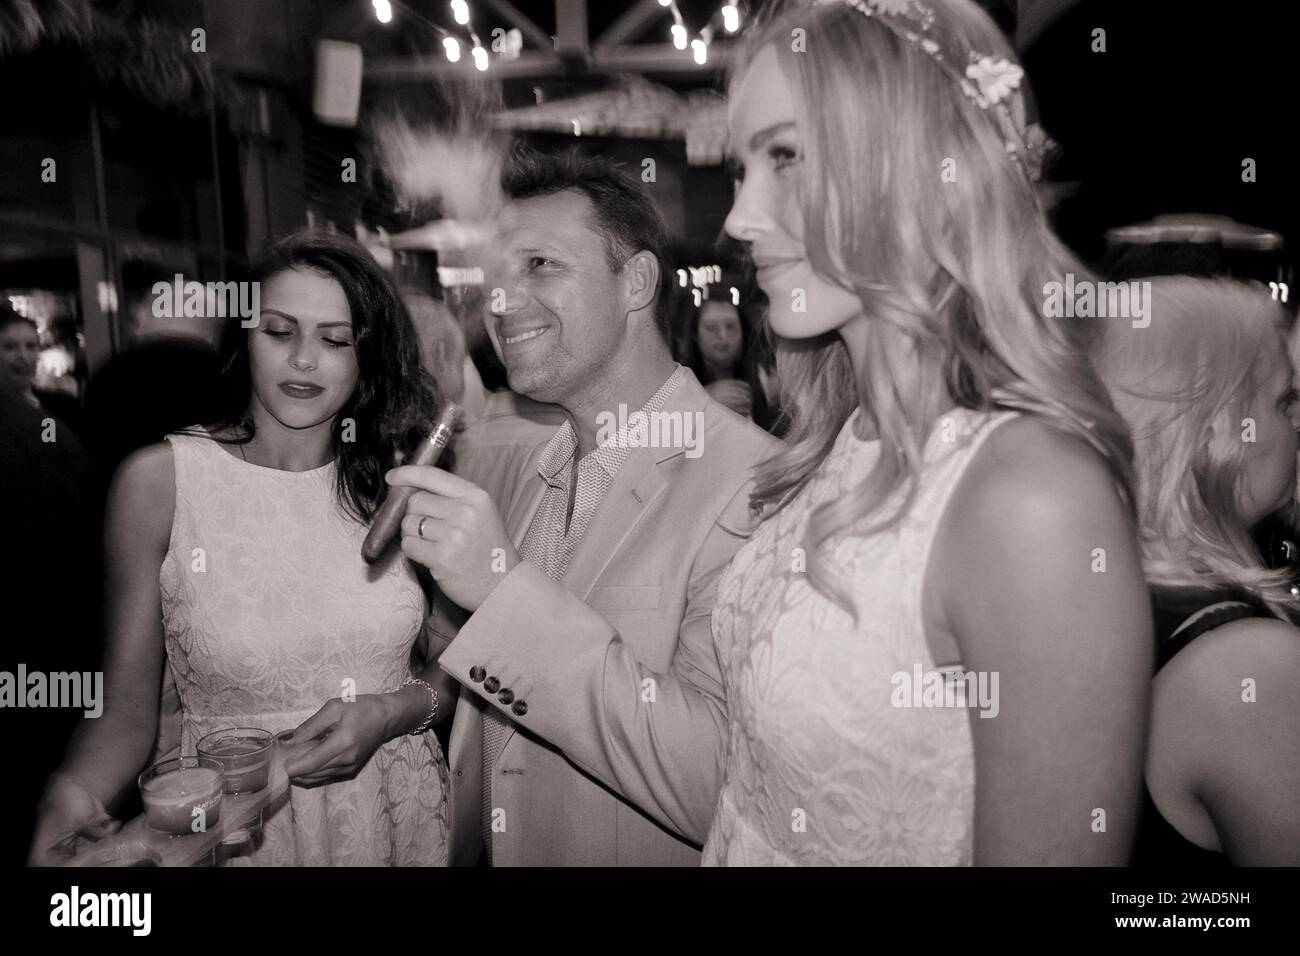 A man smokes a Romeo y Julieta cigar with two beautiful female models by his side at a Havana Cigars event at a Sydney nightclub Stock Photo